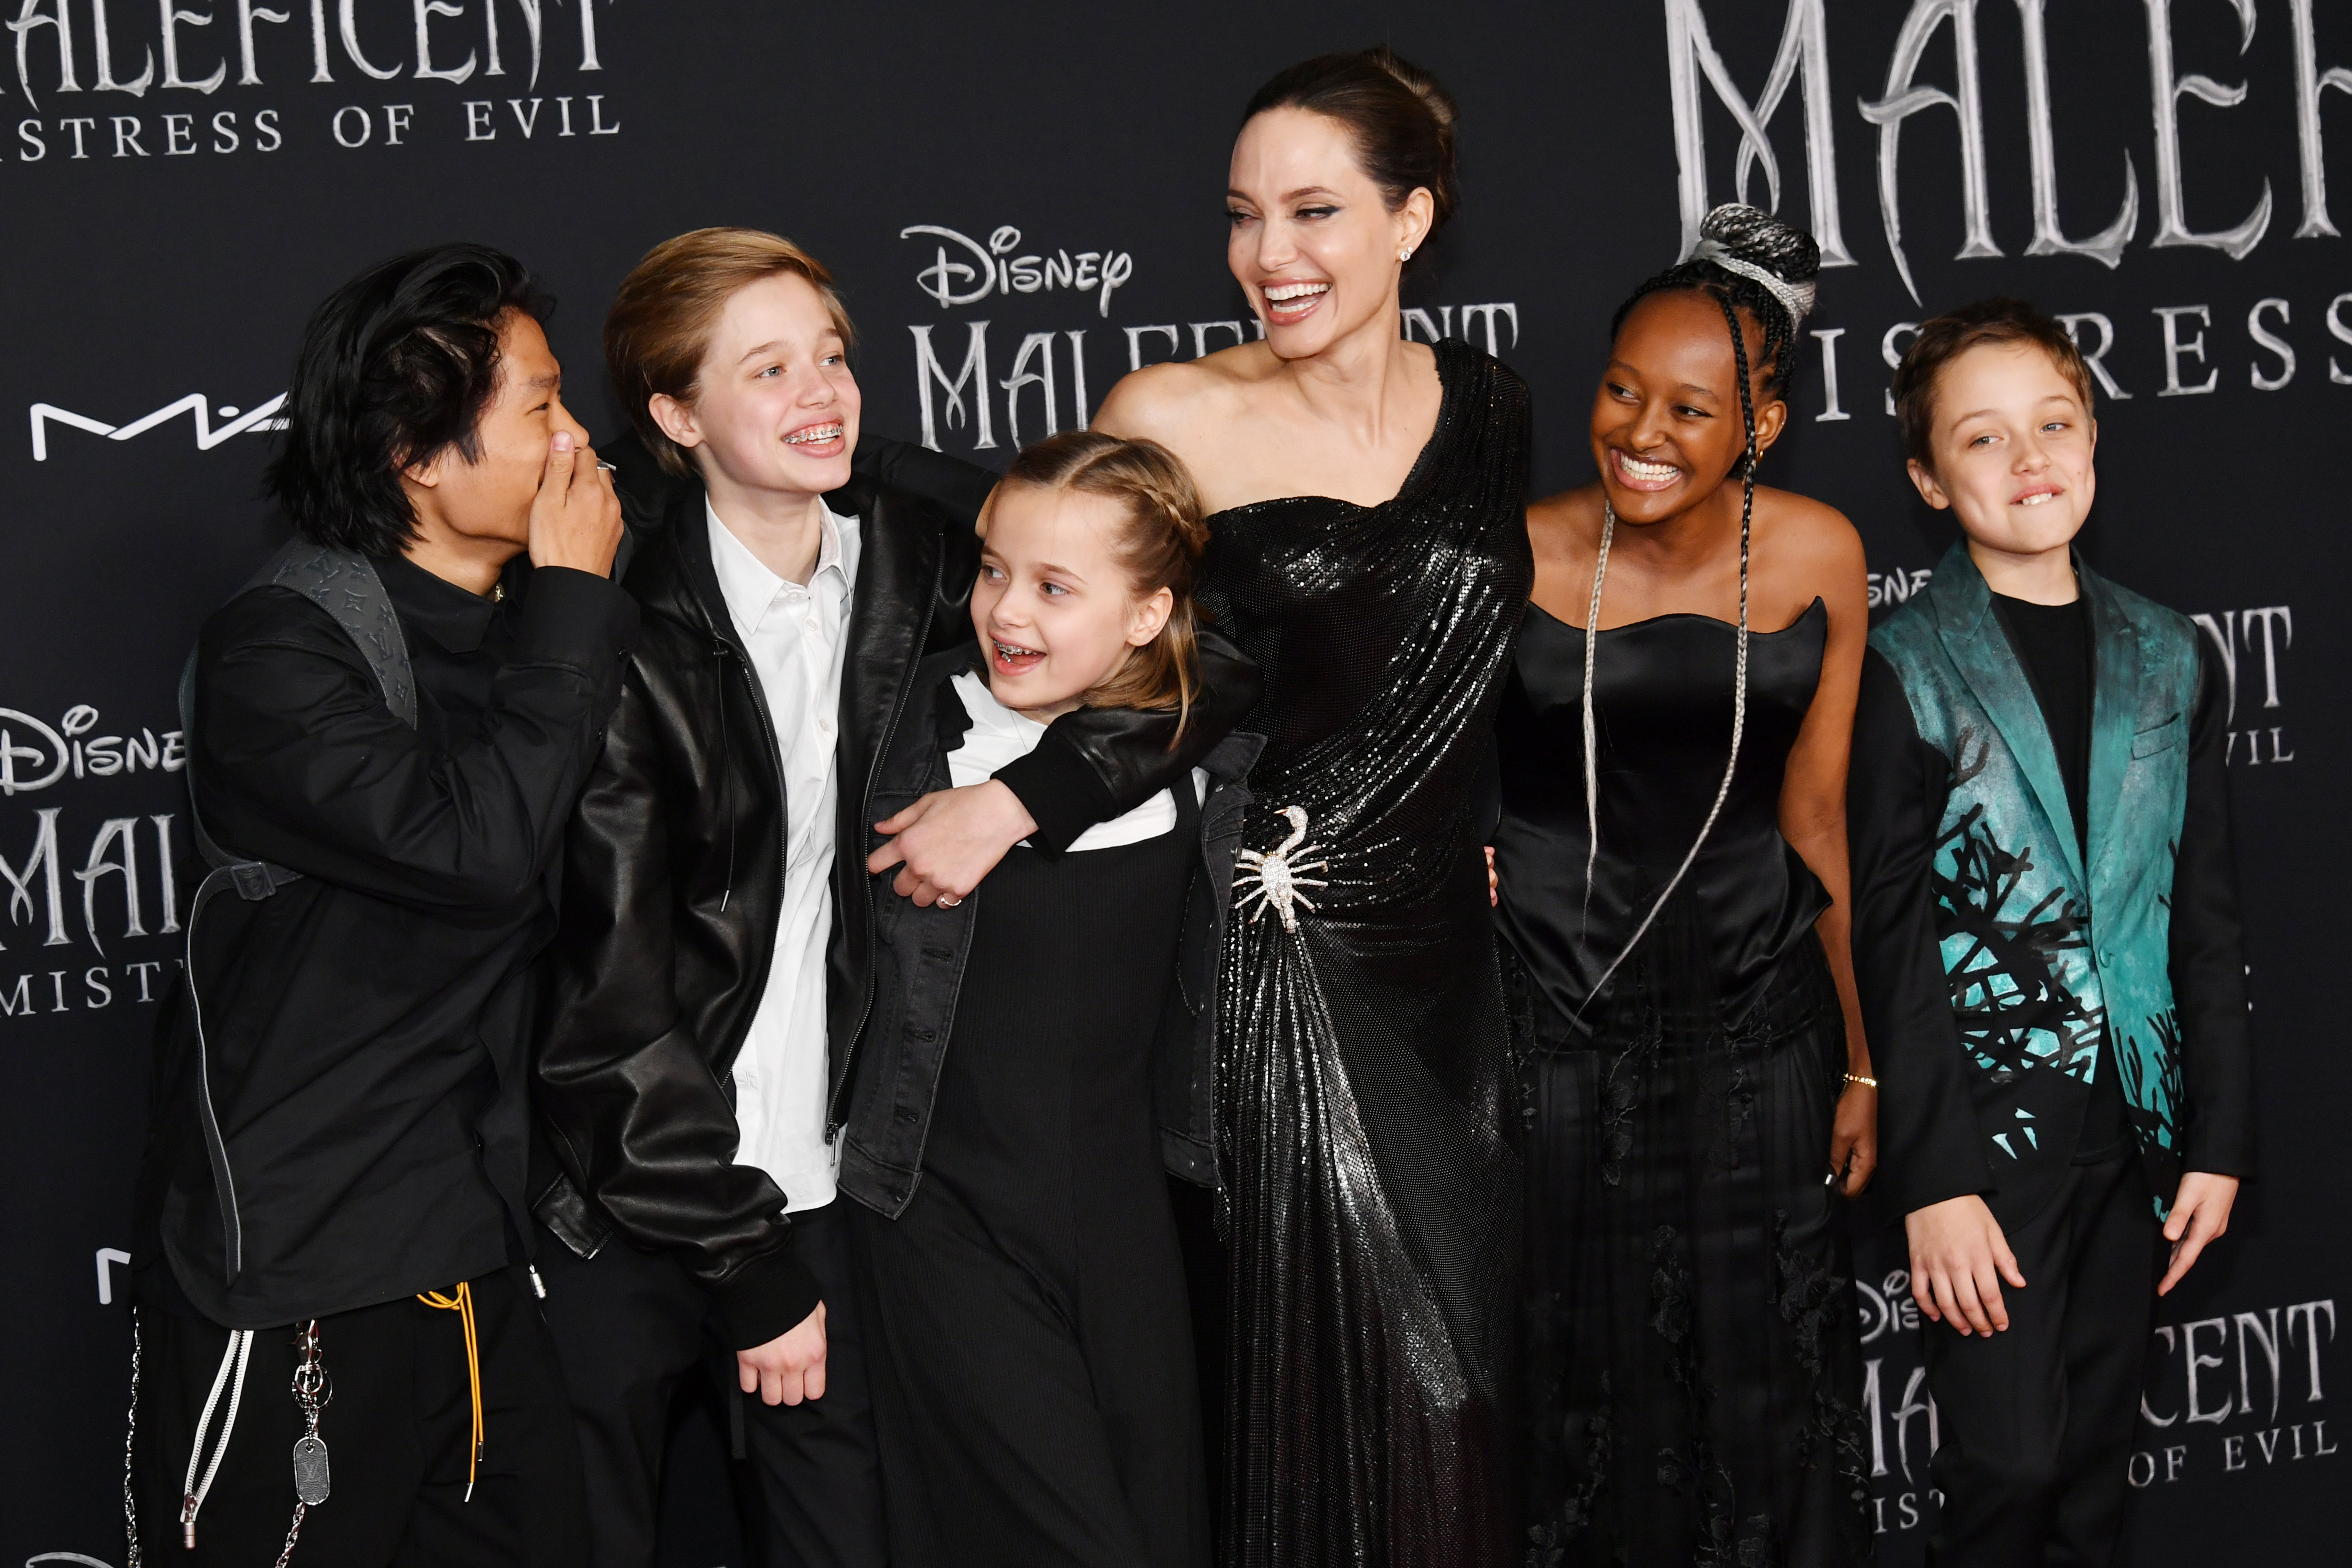 Pax, Shiloh, Vivienne, Angelina Jolie, Zahara, and Knox Jolie-Pitt attend the world premiere of Disney's “Maleficent: Mistress Of Evil" at El Capitan Theatre in Los Angeles, California, on September 30, 2019. | Source: Getty Images